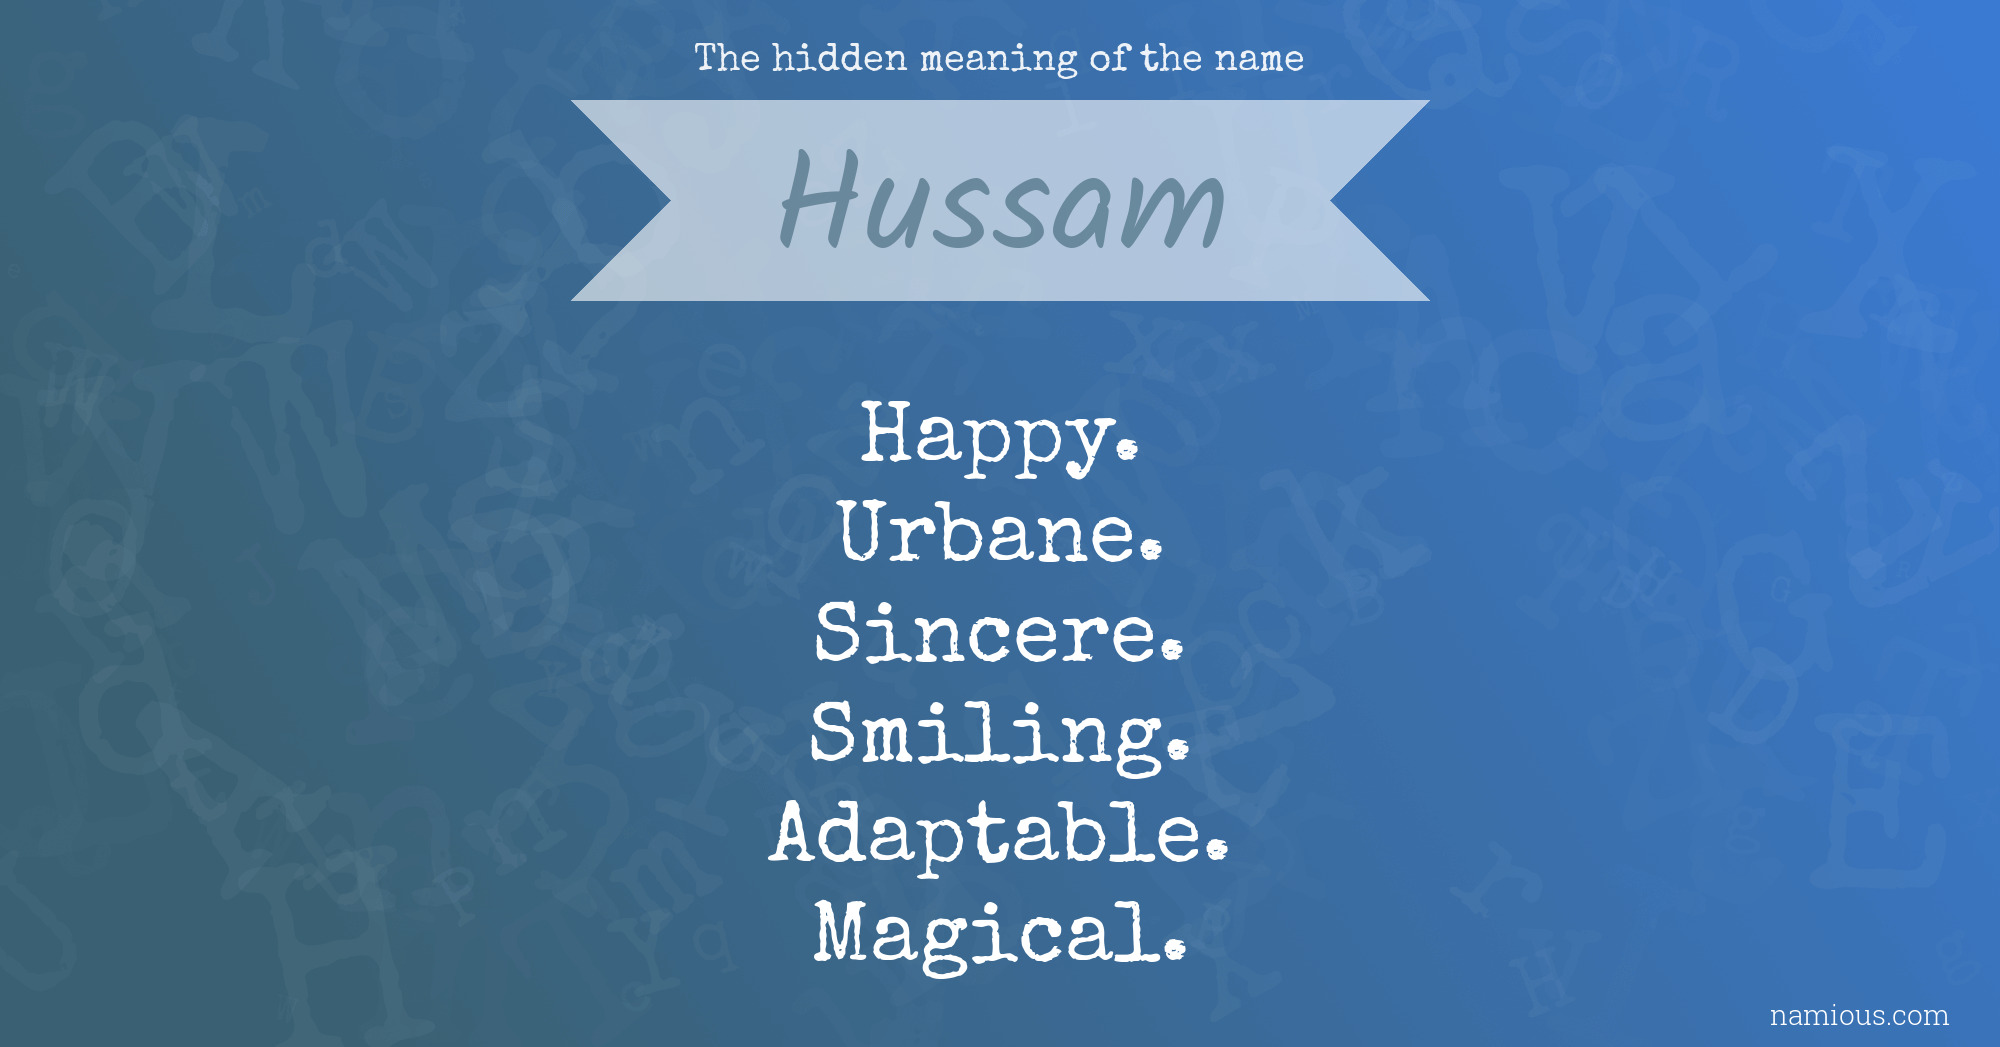 The hidden meaning of the name Hussam